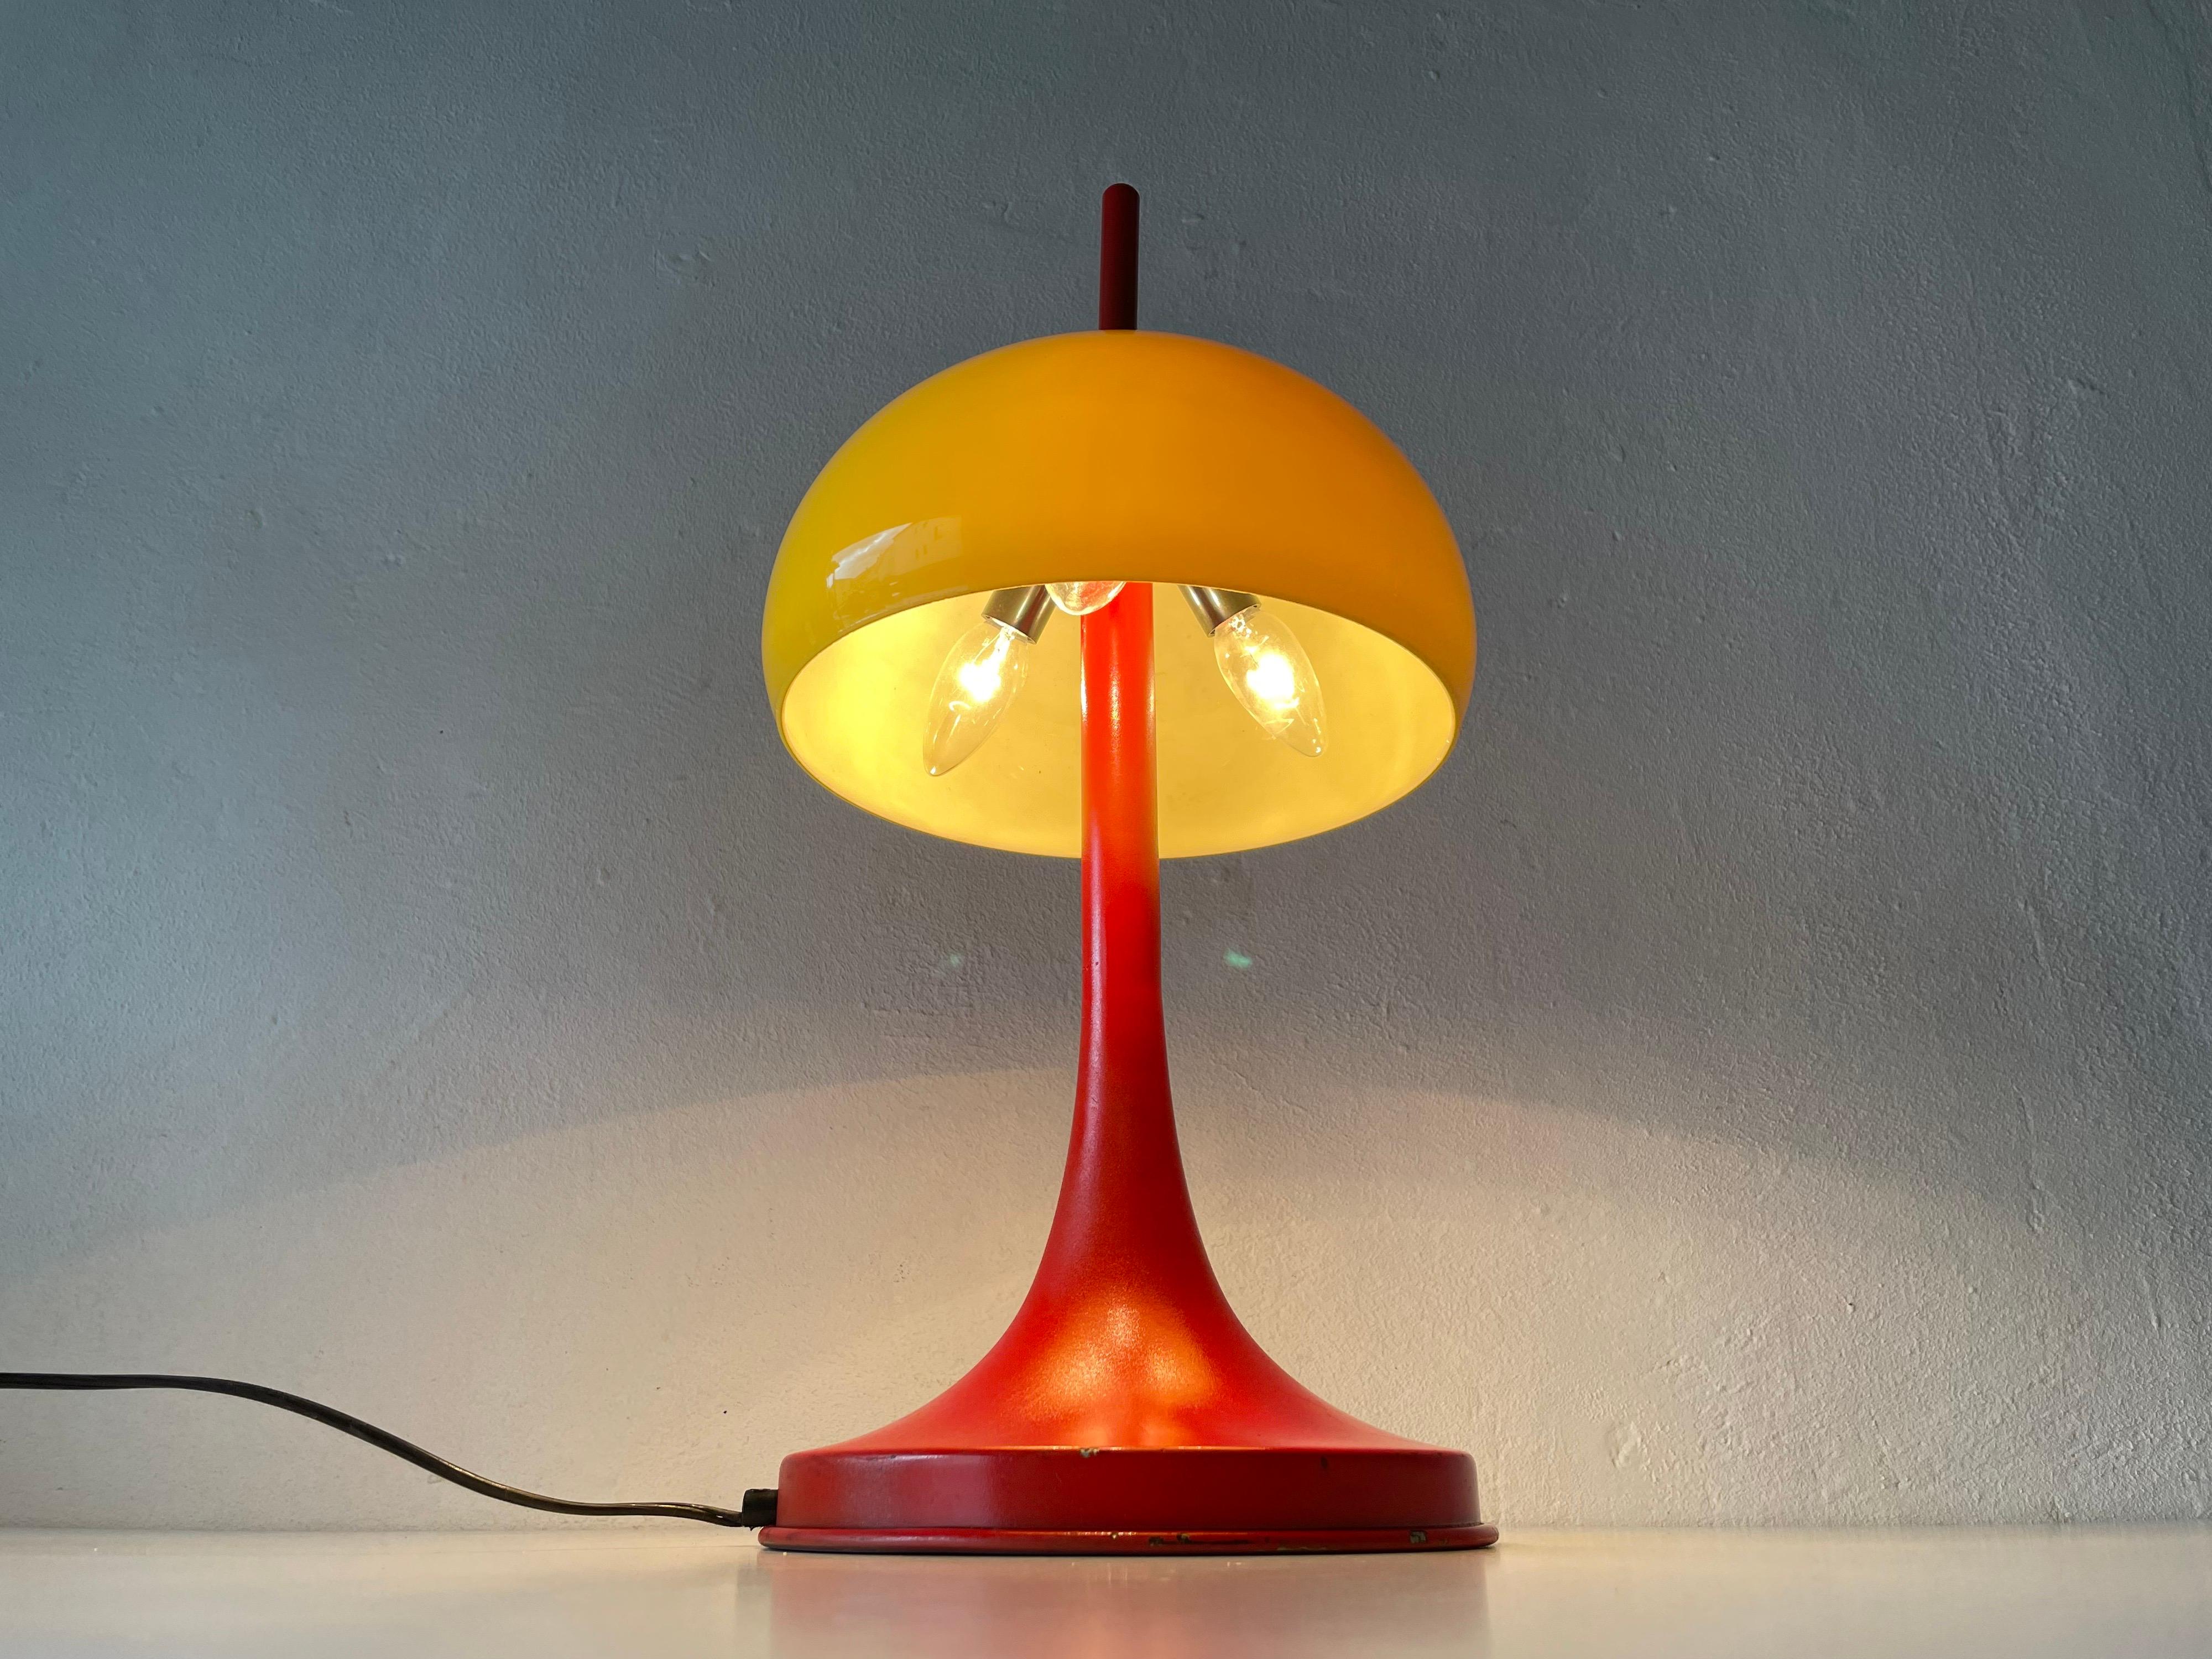 Yellow Glass & Red Metal Iconic Model Pop Art Table Lamp, 1970s, Italy For Sale 1